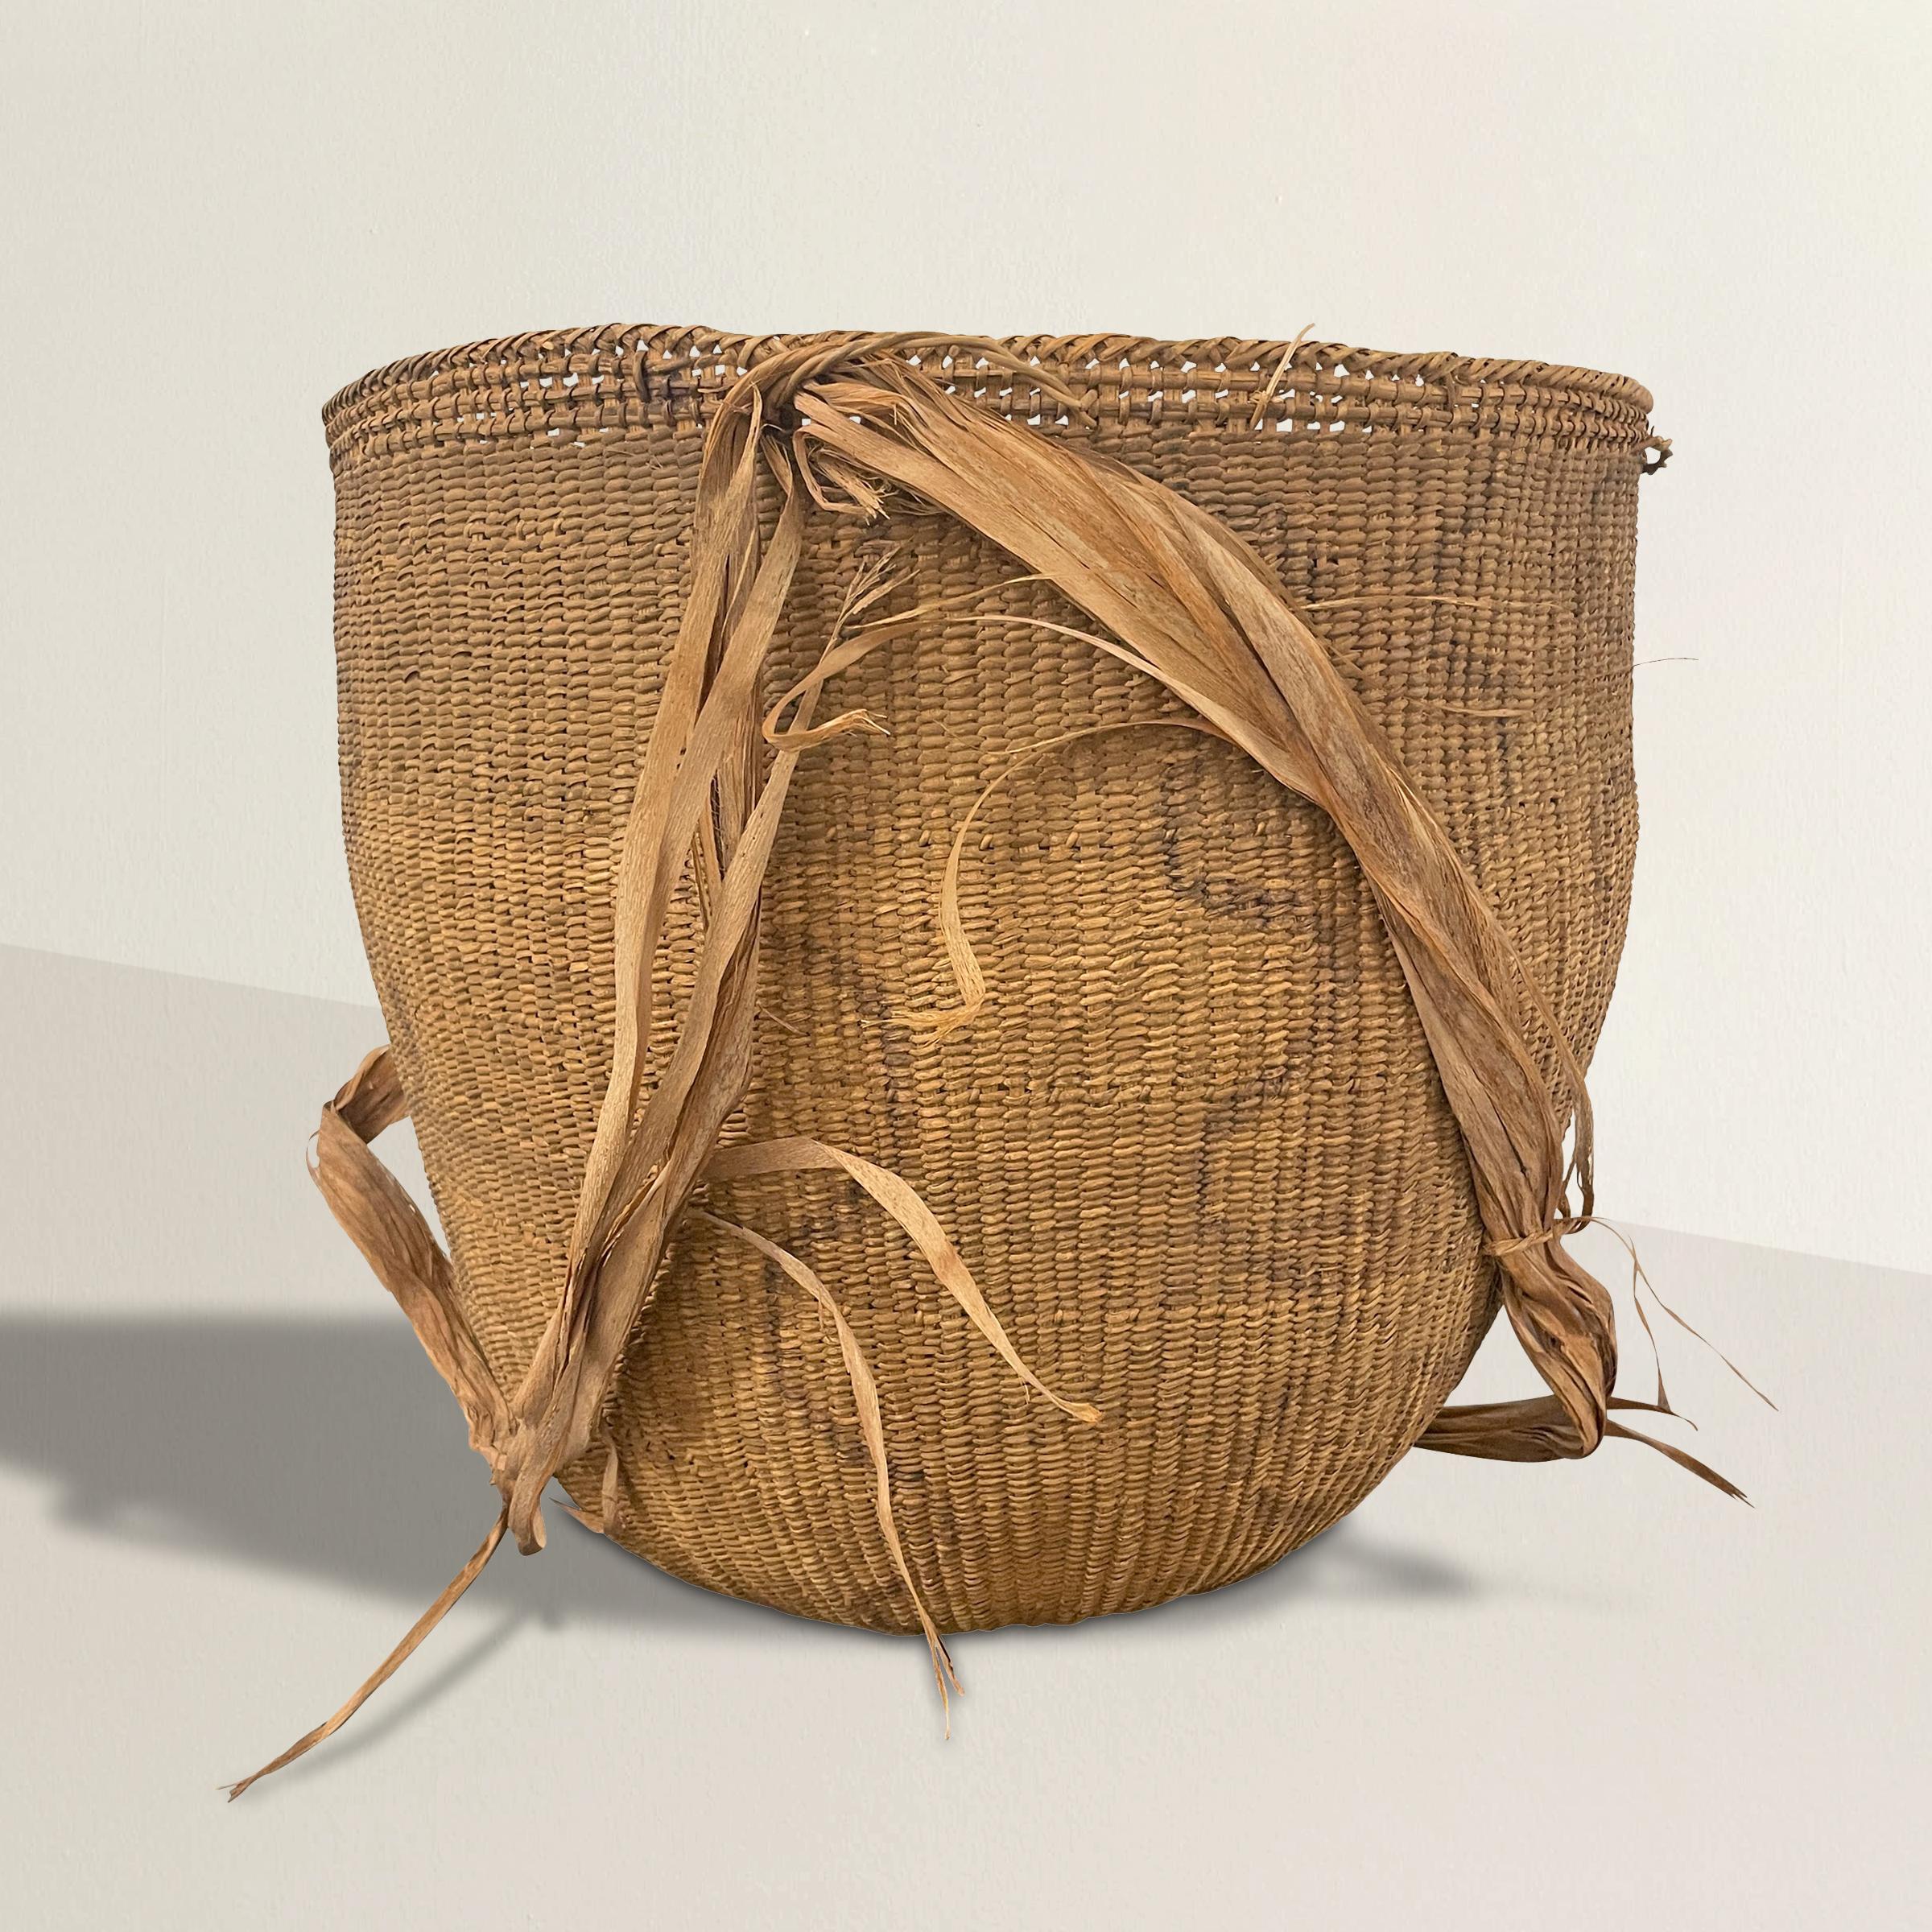 A 20th century Yanomami gathering basket decorated with charcoal line drawings on the exterior. This basket is tightly handwoven of natural fibers with several inner rings for stability, and palm leaf straps. Originally the straps placed over the